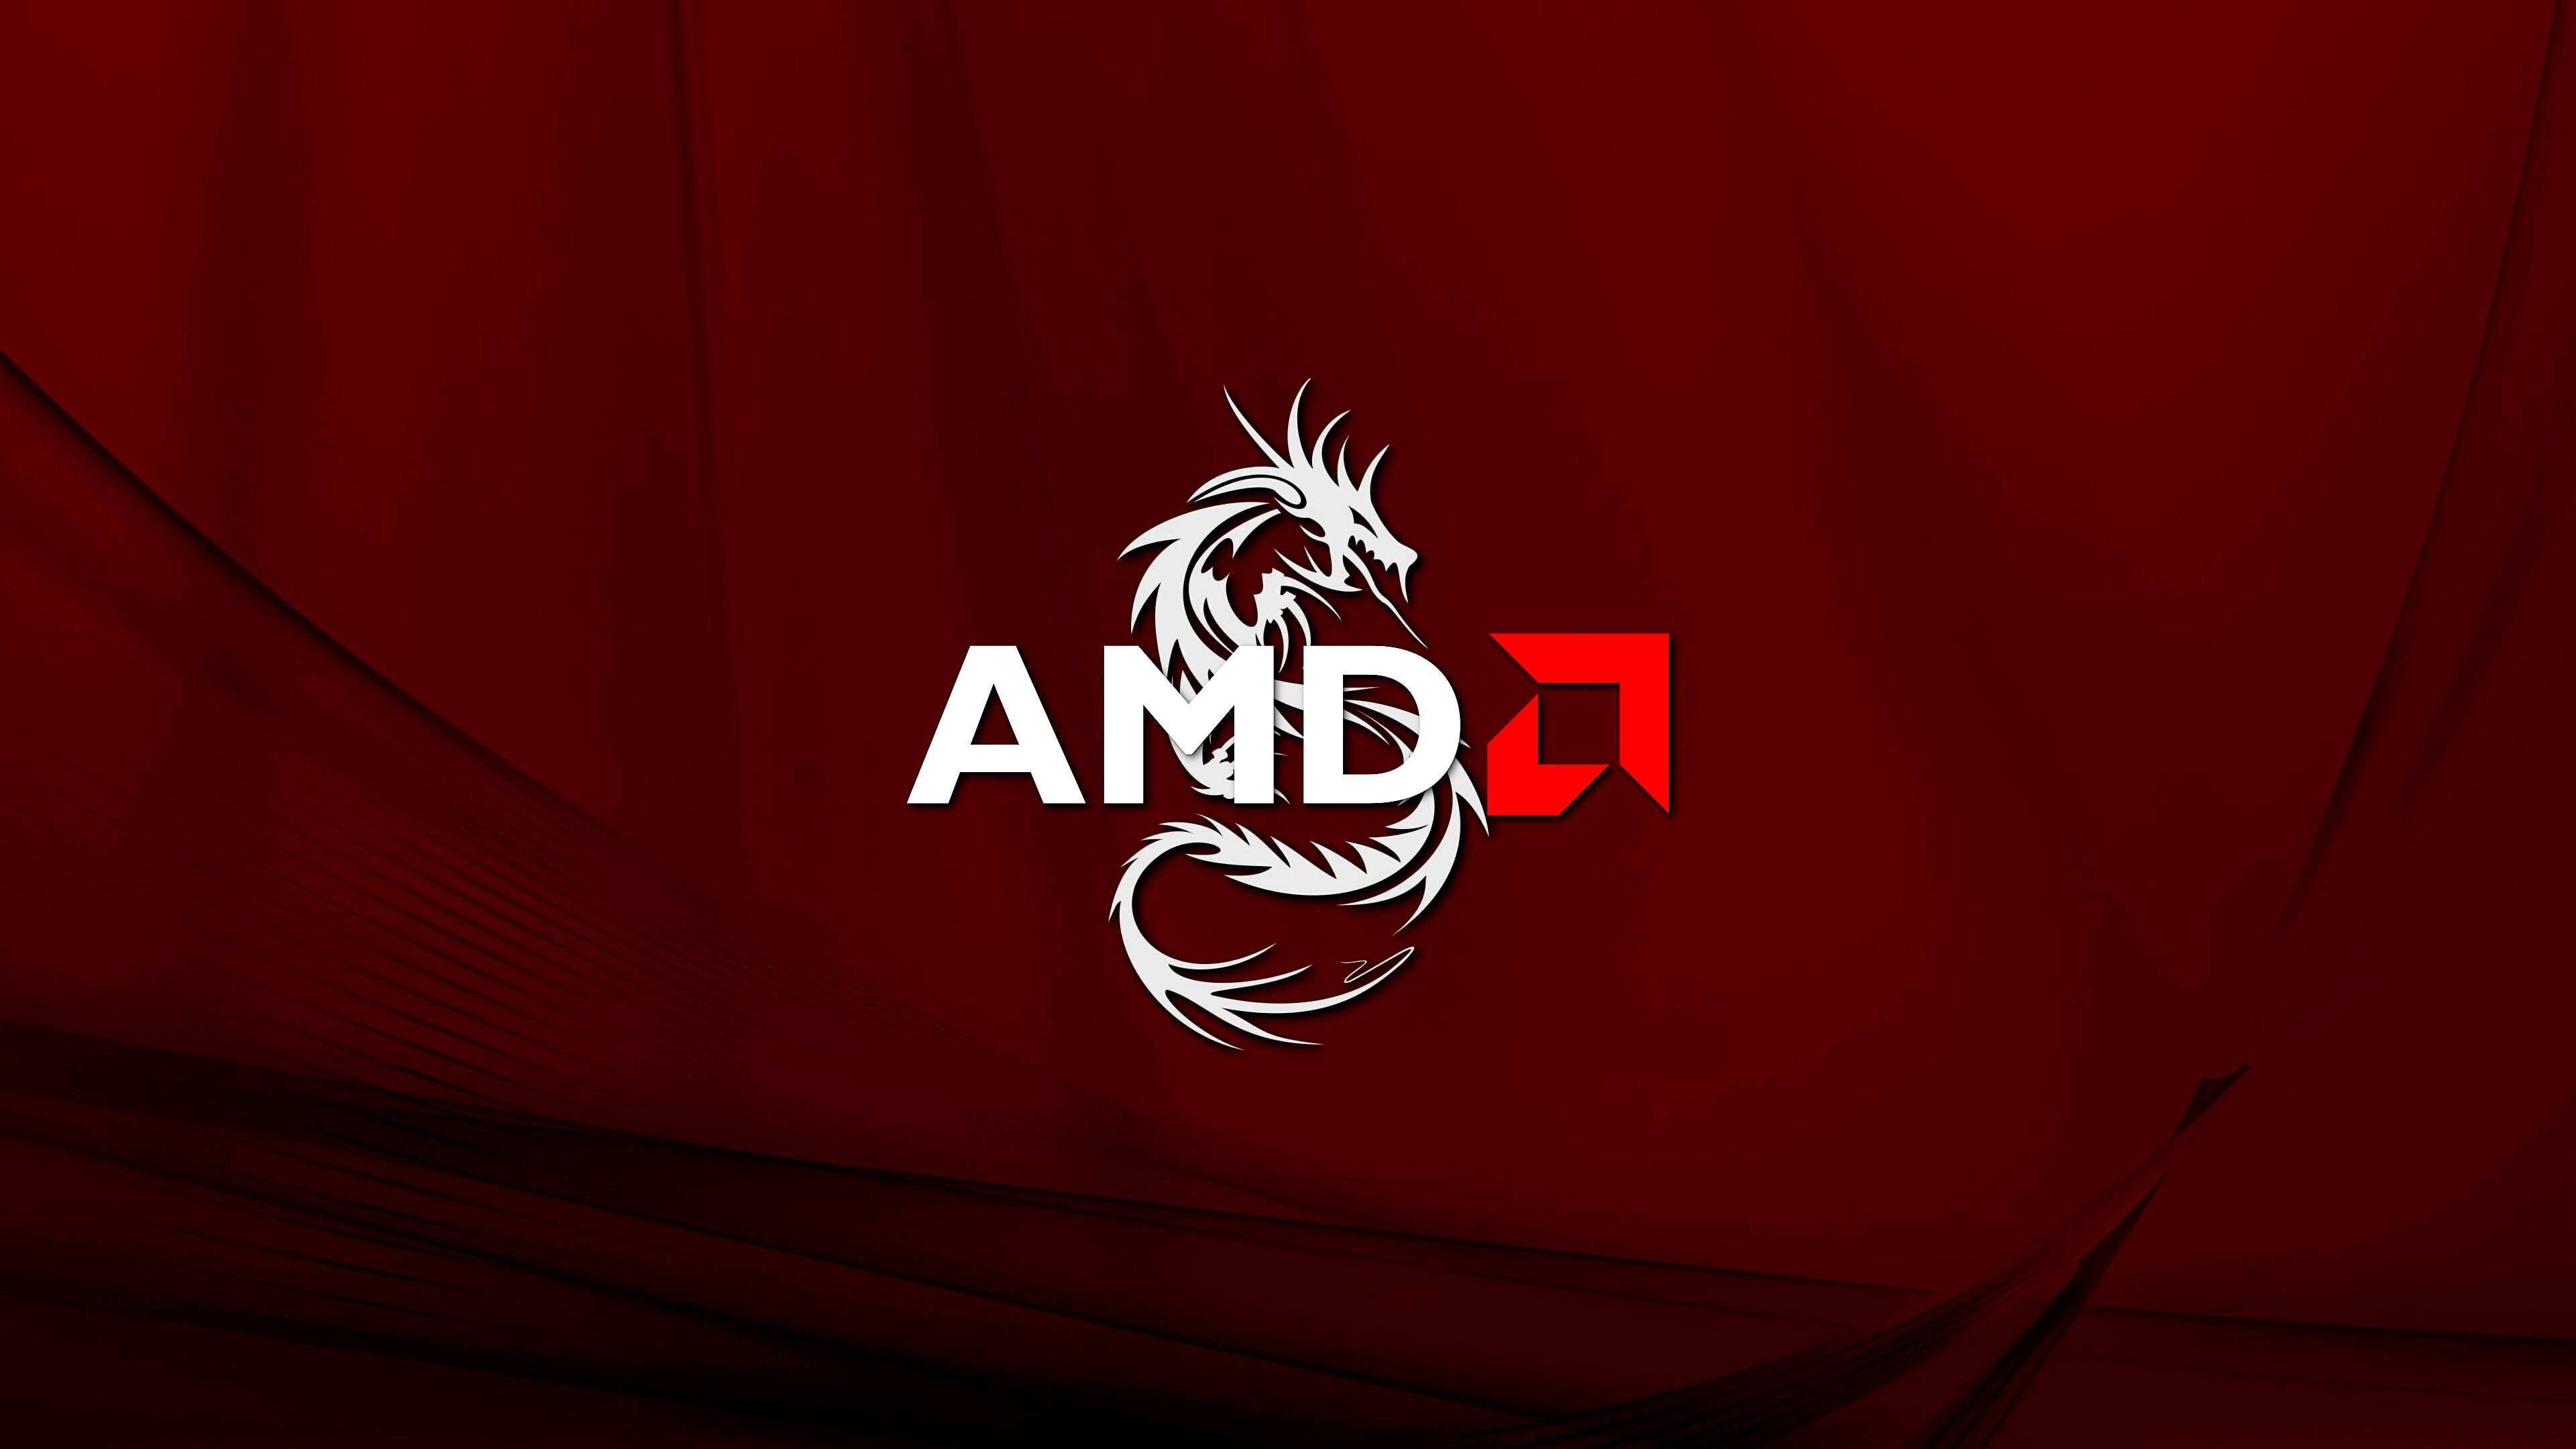 By request, I made a 4K AMD Wallpaper (3840x2160)